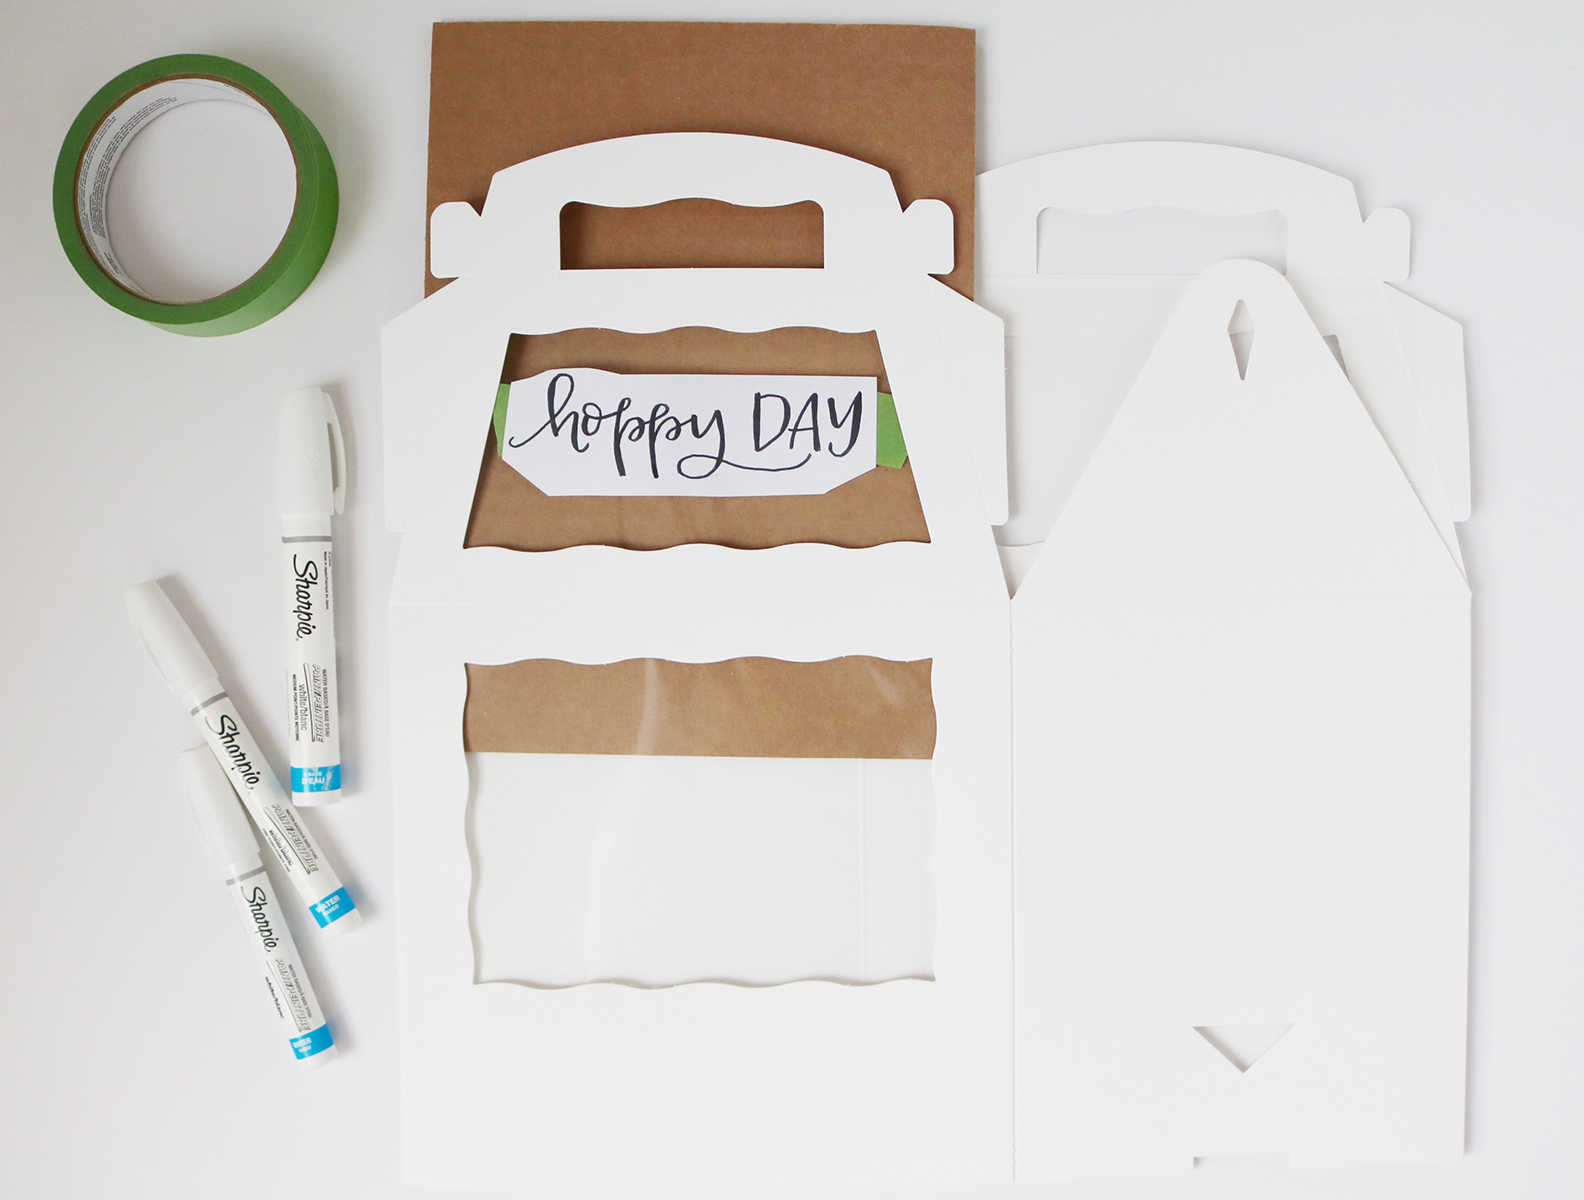 Oh hoppy day! Sweet hostess gift wrapping inspiration using cake pop boxes and DIY faux hand lettering | Creative Bag